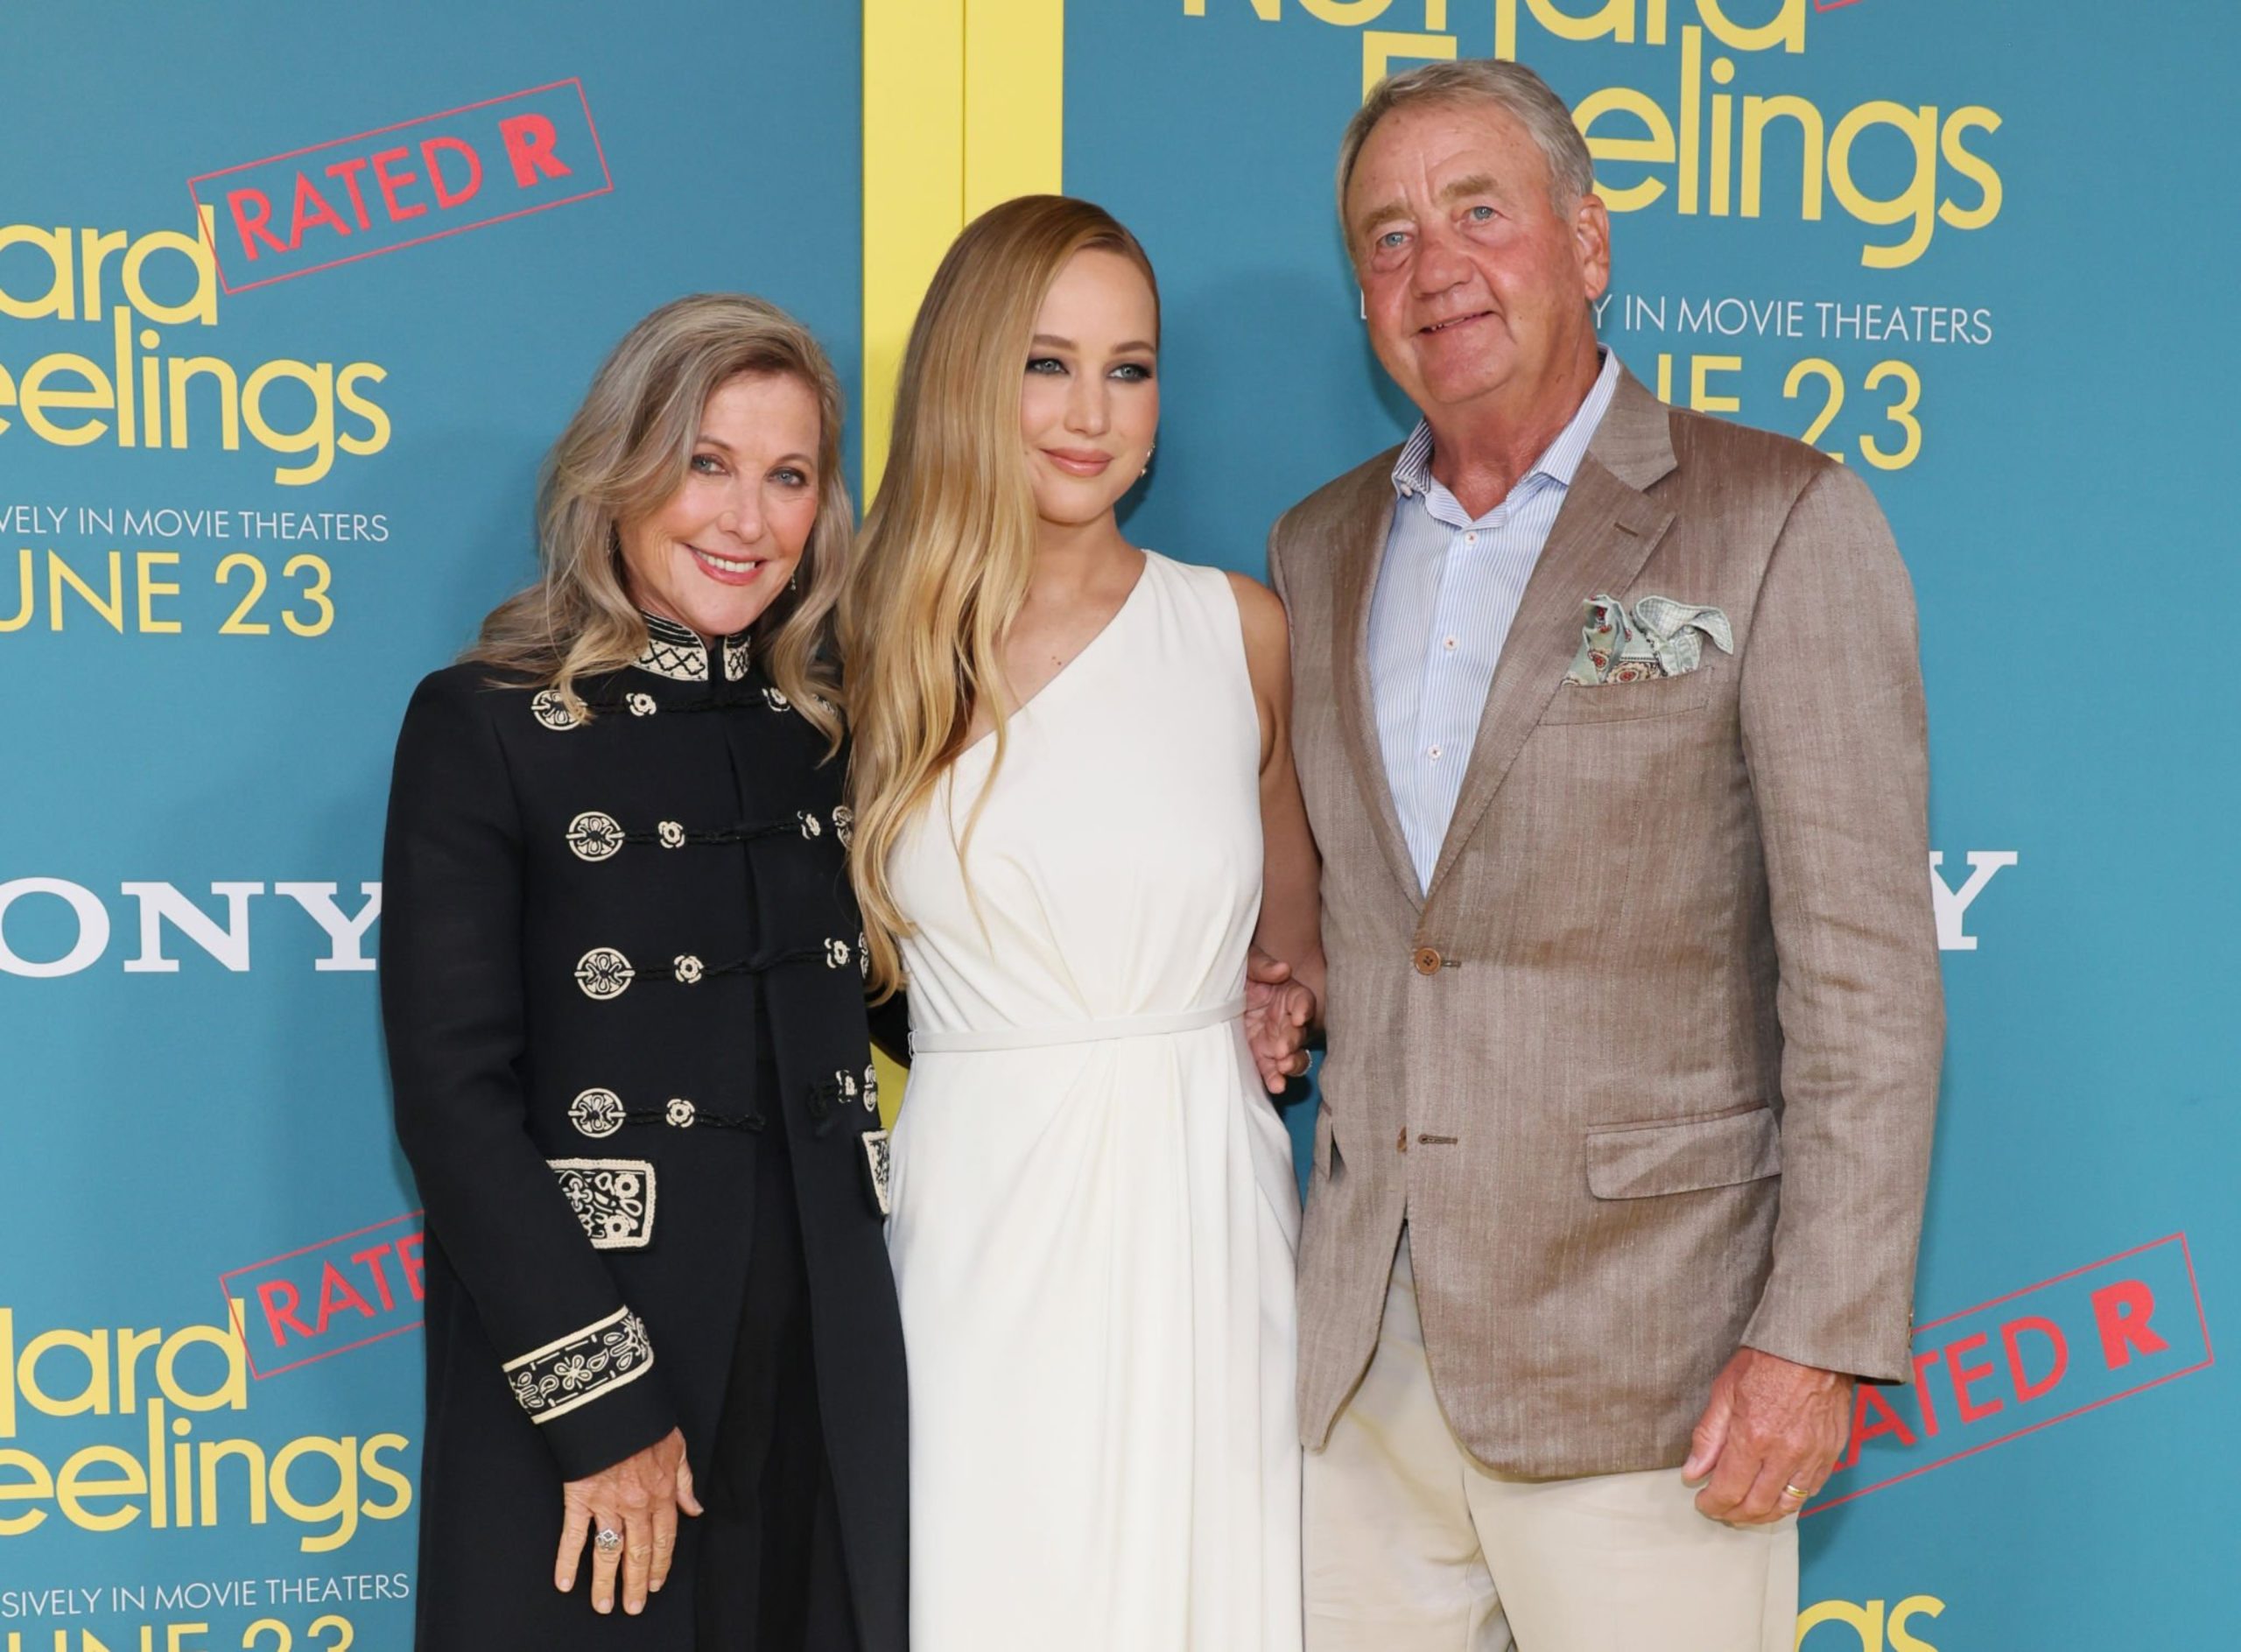 Jennifer Lawrence, her mother Karen Lawrence, and her father Gary Lawrence